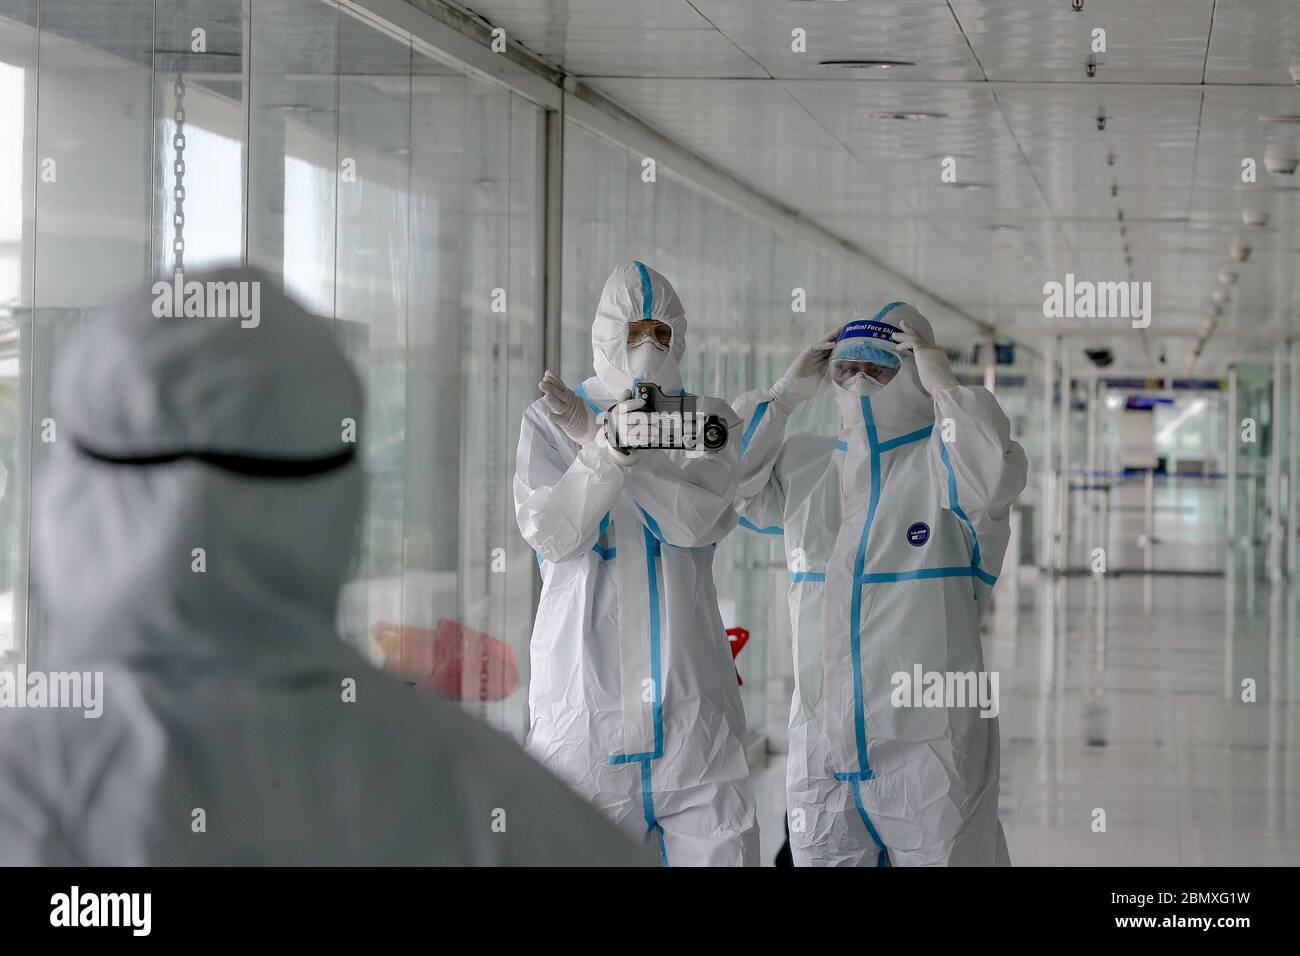 Manila. 11th May, 2020. Health workers wearing protective suits wait for the arrival of Filipinos returning from London at the Manila Ninoy Aquino International Airport in the Philippines, May 11, 2020. All foreigners and Filipinos arriving in the Philippines need to undergo testing for the COVID-19 and quarantine to stem the spread of the virus, Presidential spokesperson Harry Roque said on Monday. Credit: Rouelle Umali/Xinhua/Alamy Live News Stock Photo